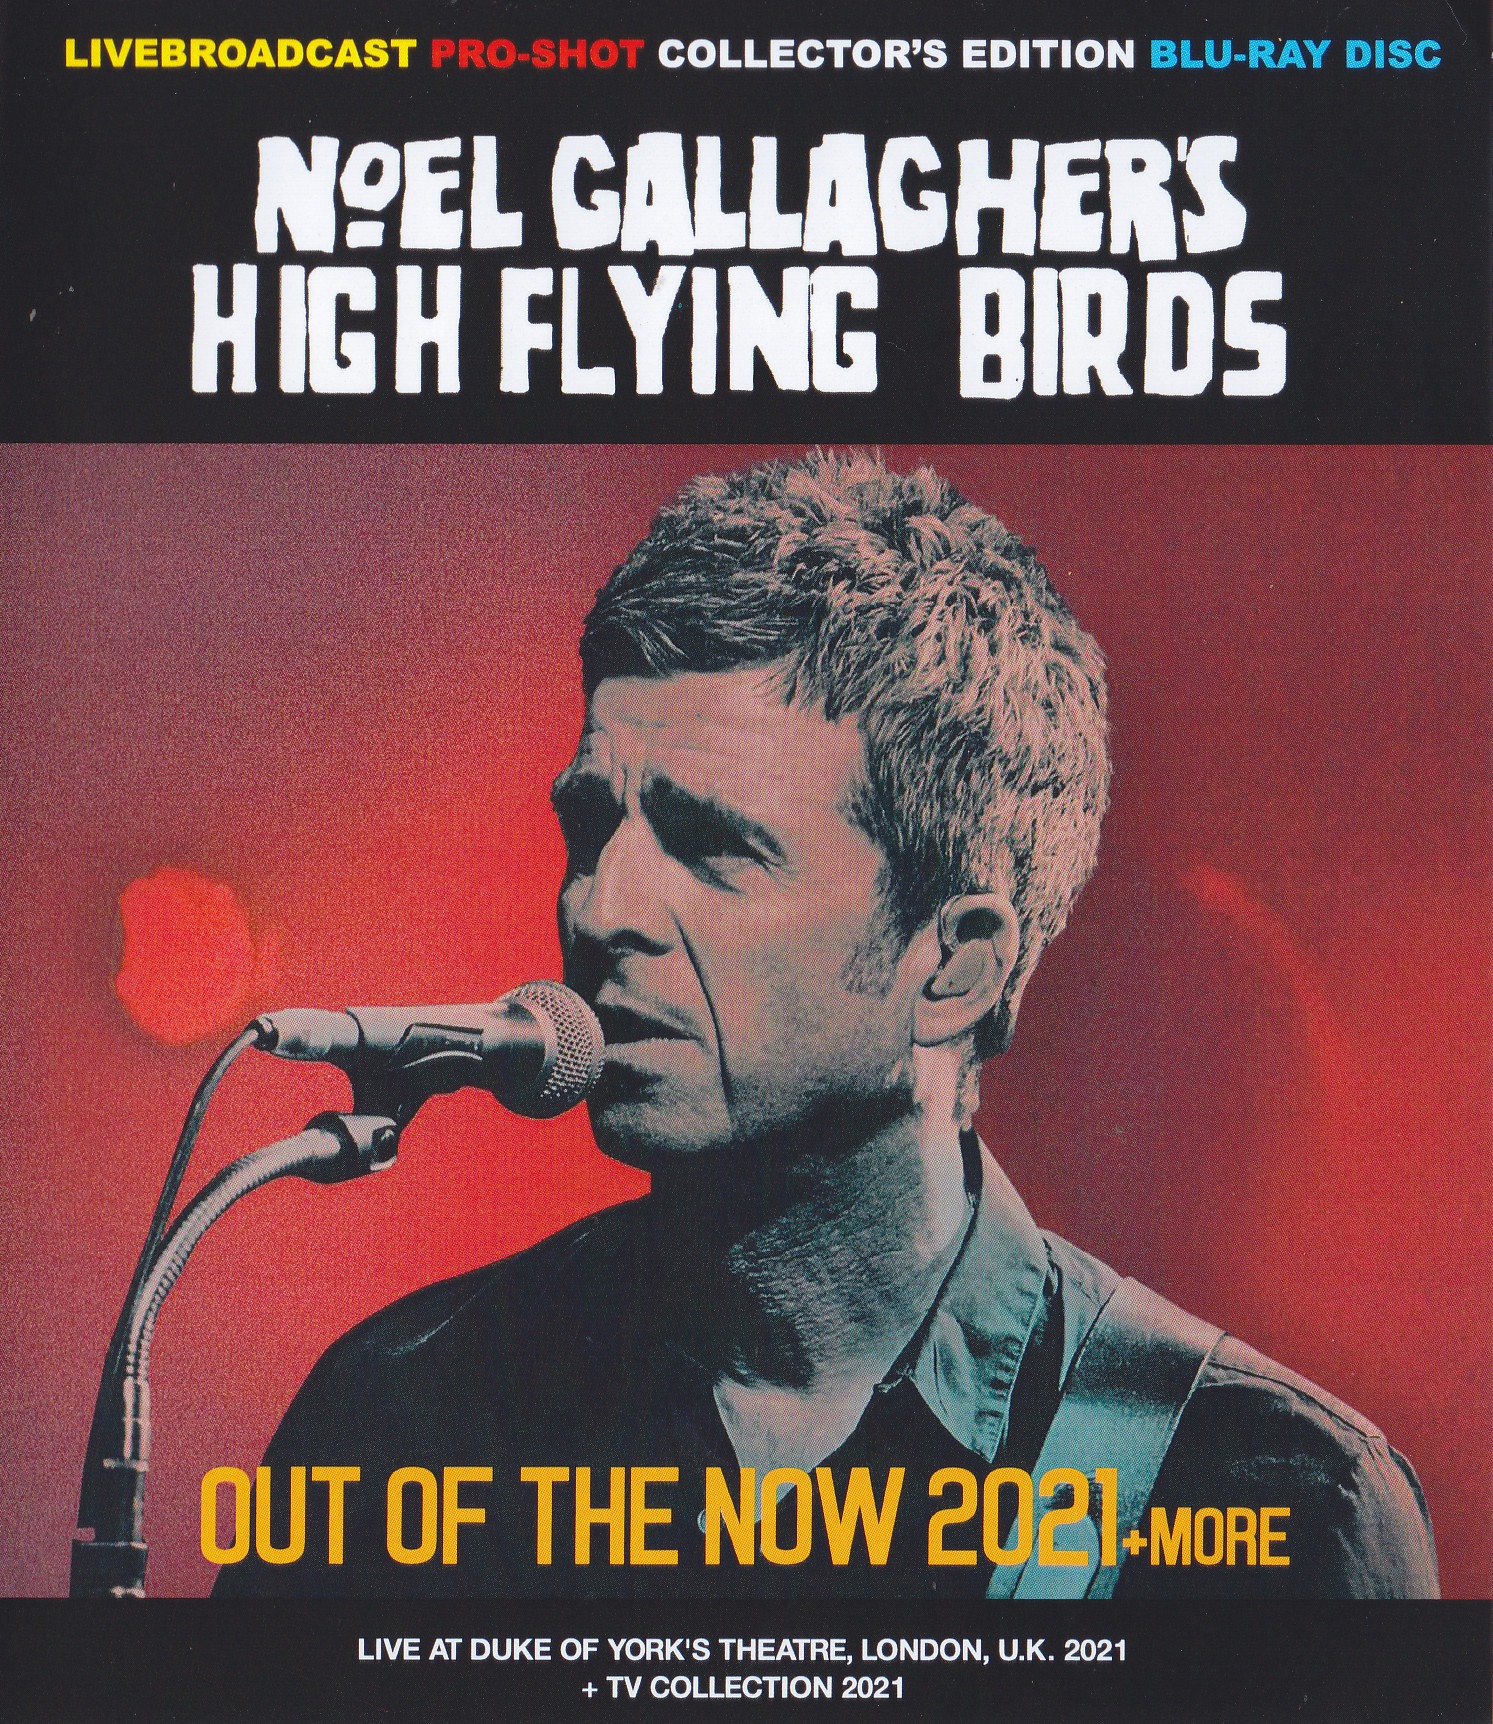 Noel Gallagher's High Flying Birds / Out Of The Now 2021+More